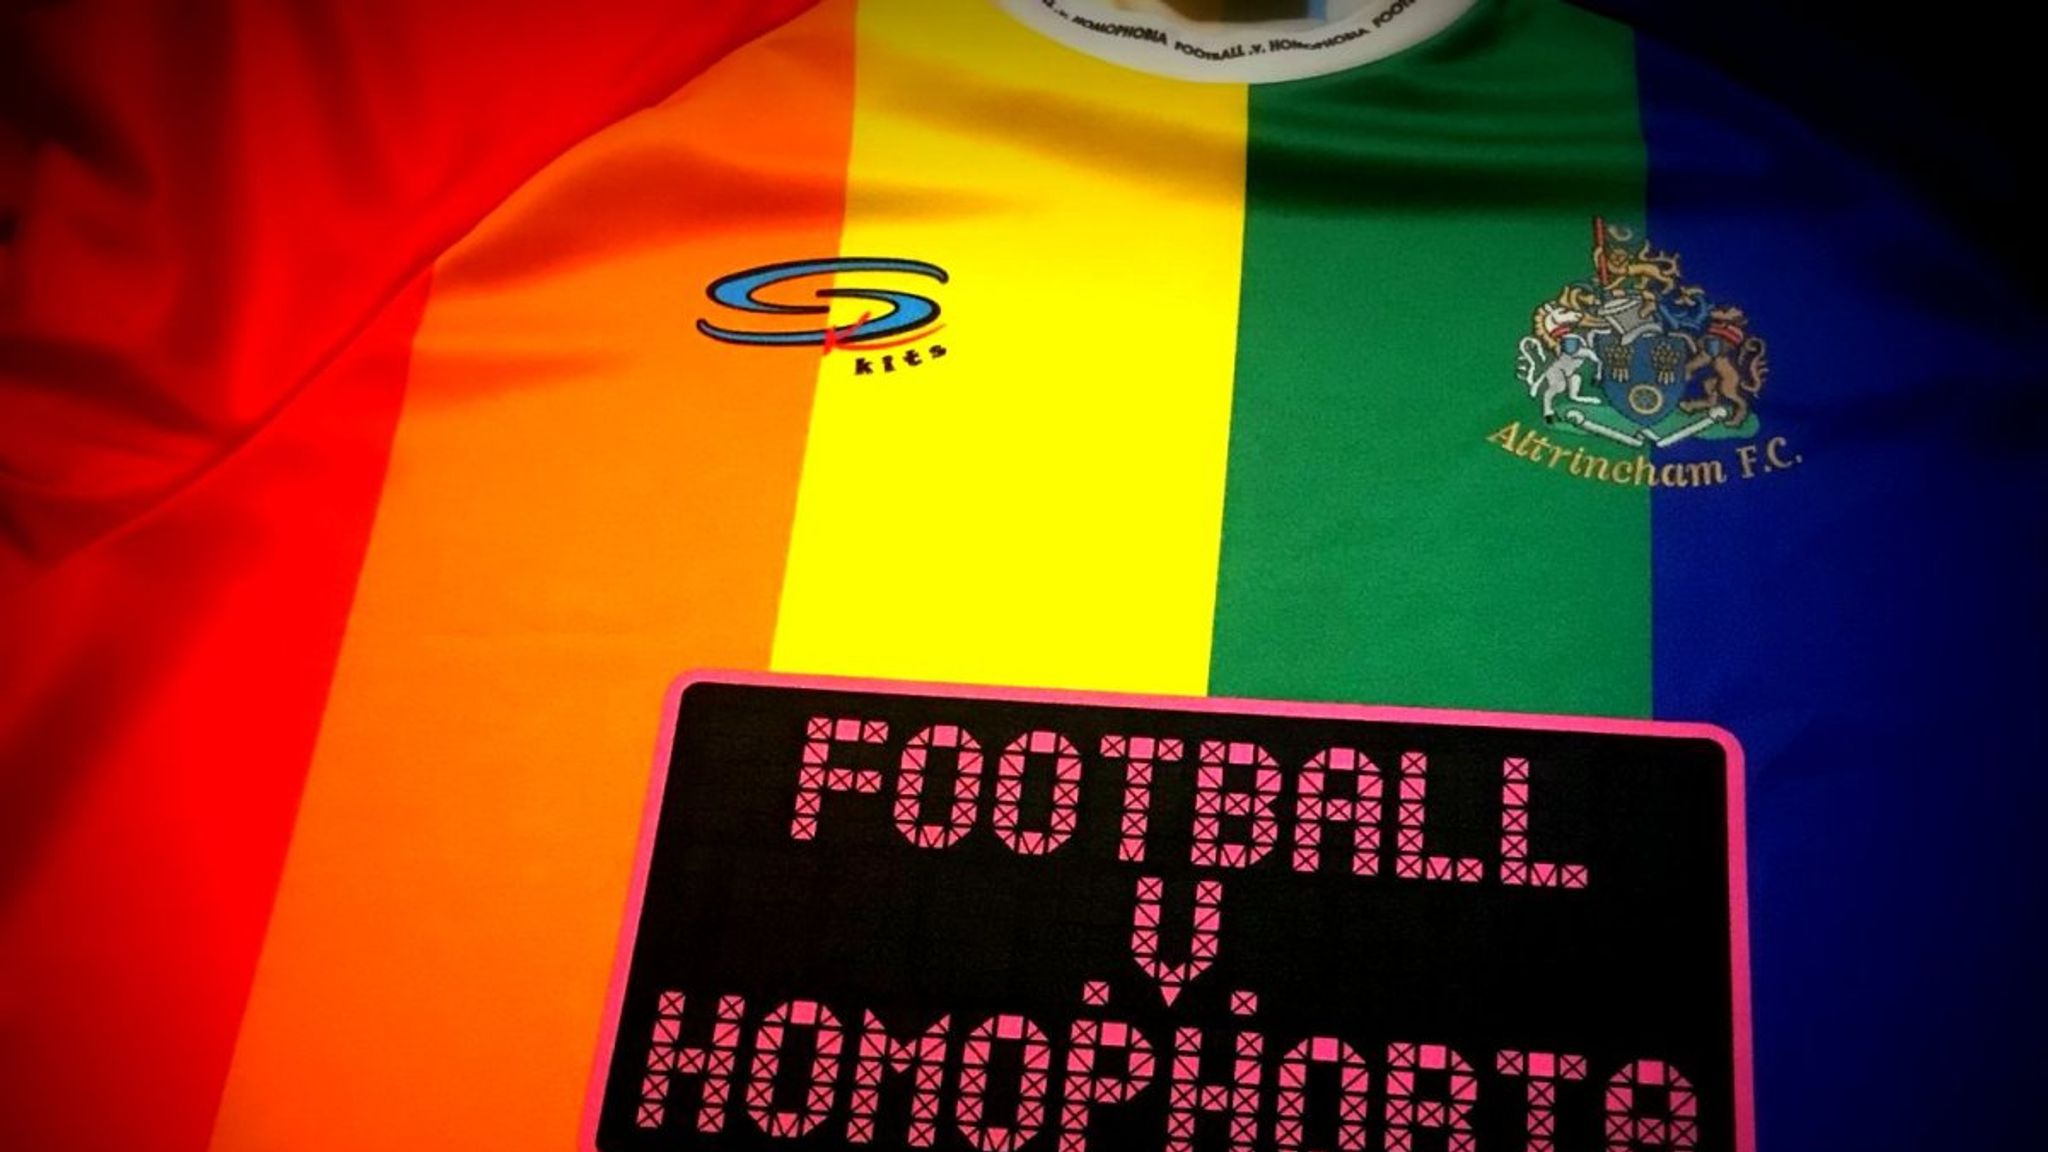 Fantastic' Altrincham FC wear LGBT-themed kit in competitive